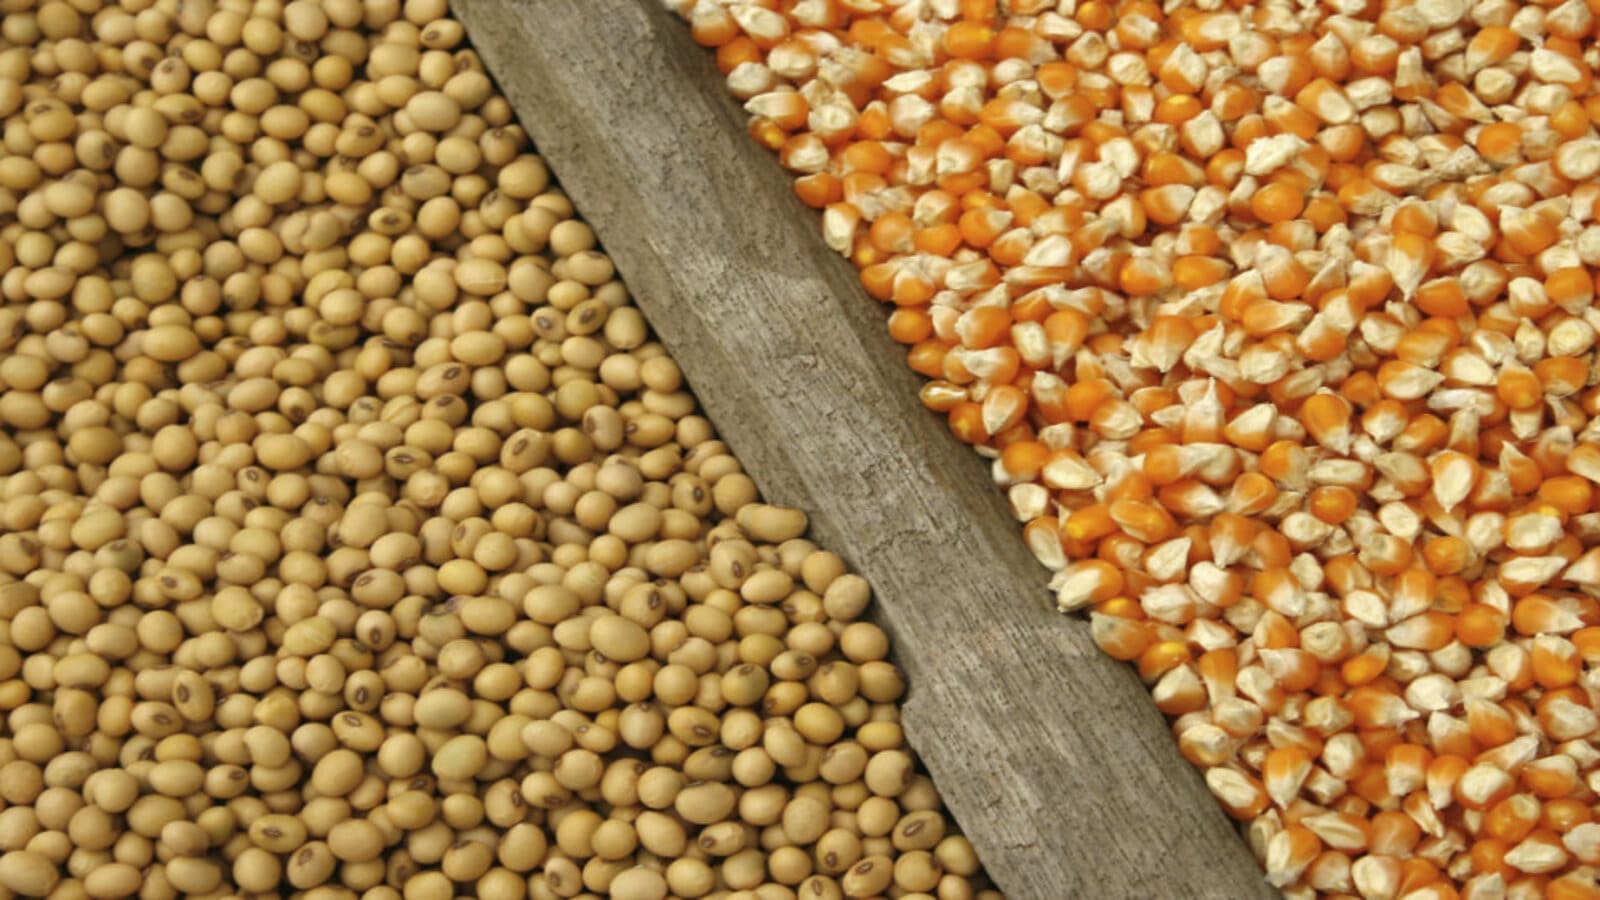 Maize farmers in Ghana opt for sesame, soya beans due to high cost of production